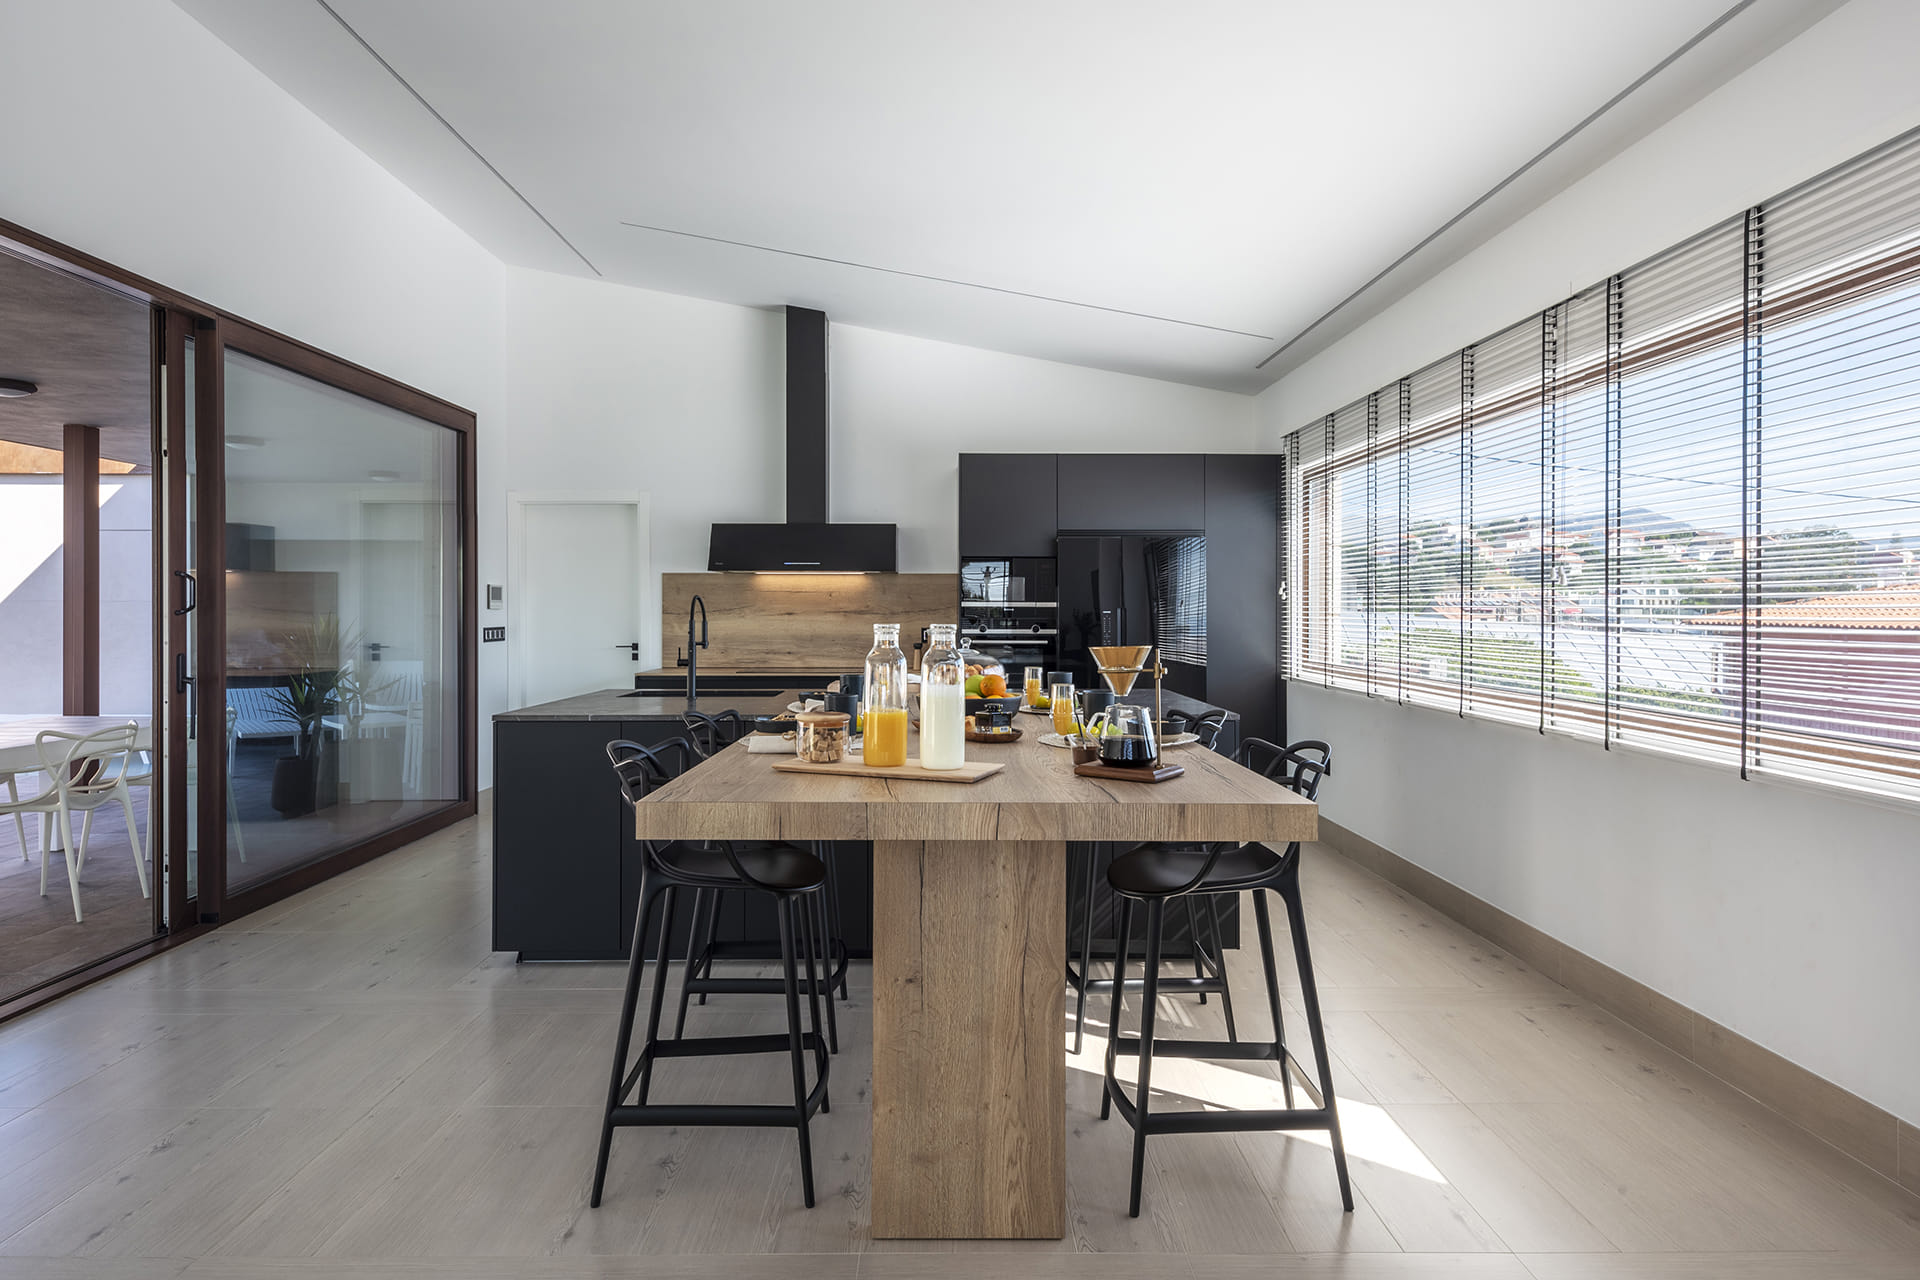 Open-plan, spacious and functional kitchen in black